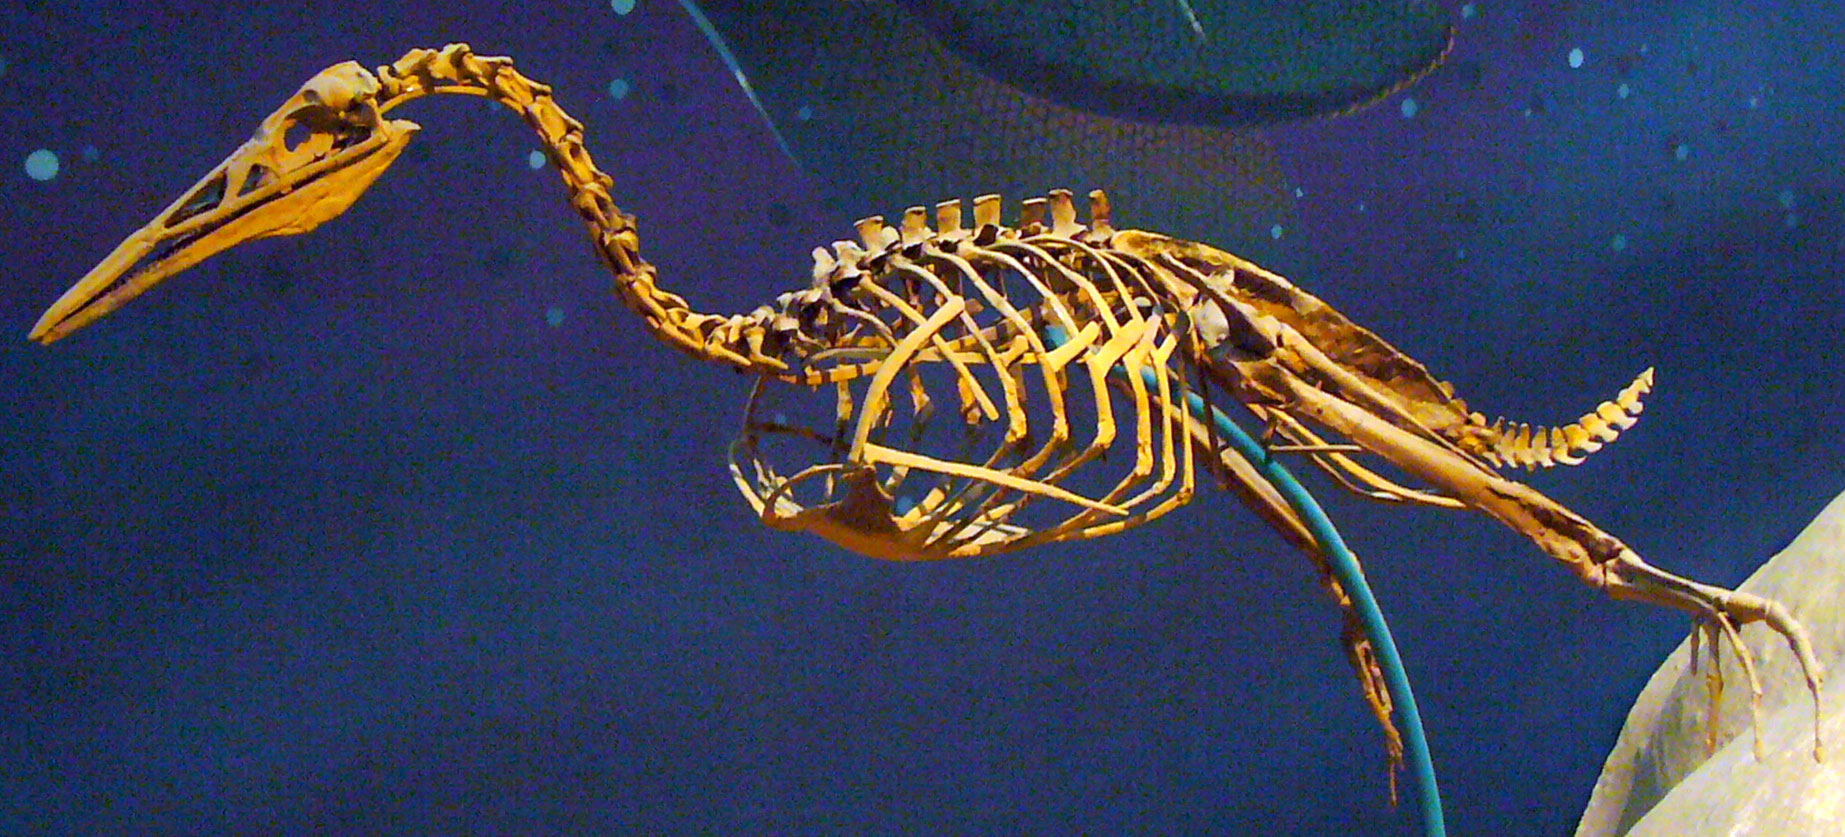 Photo of a skeleton of Hesperornis, a Cretaceous diving bird, on display at a museum.